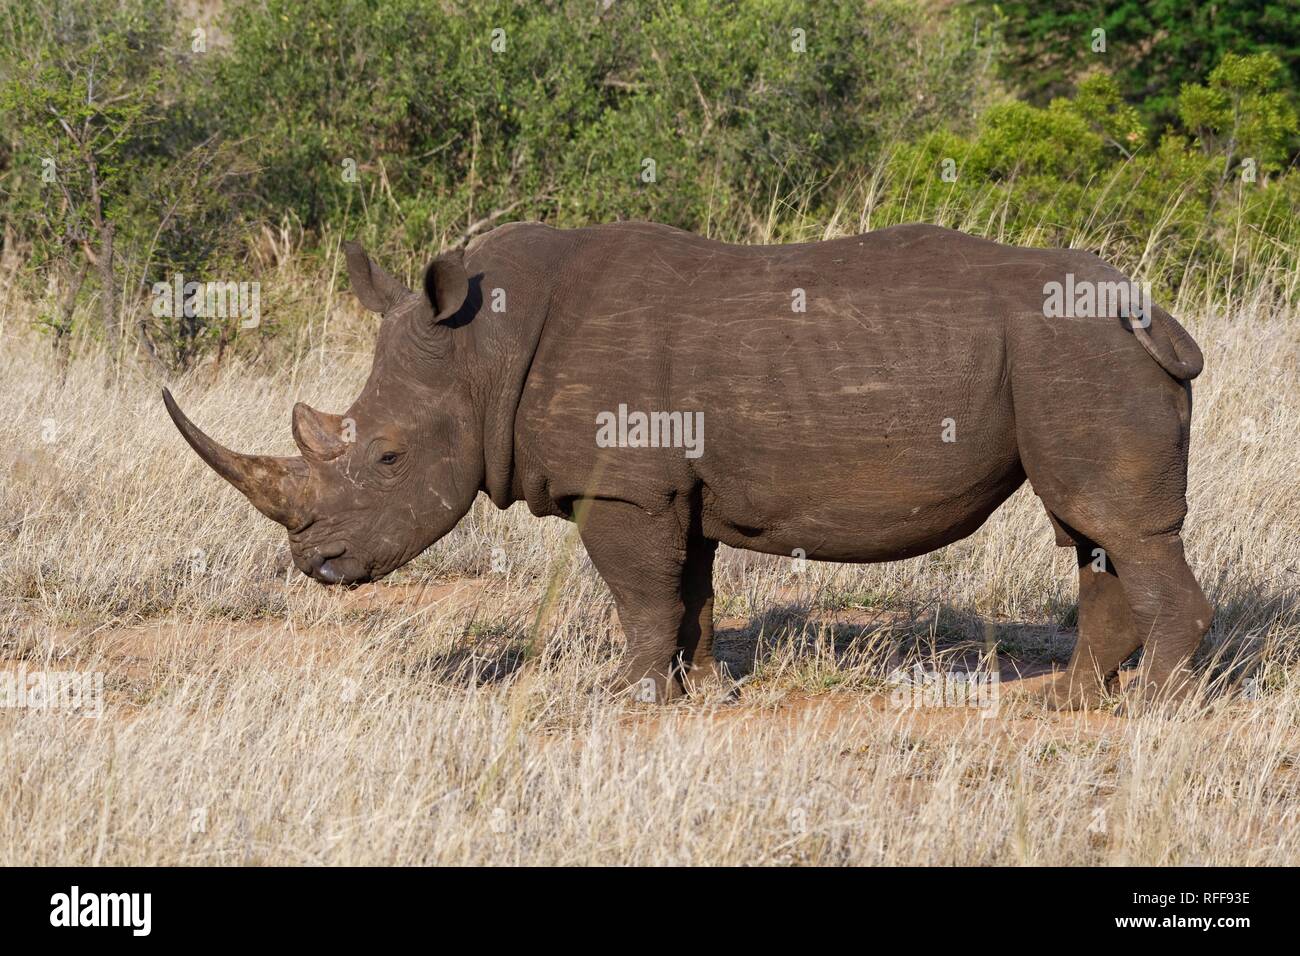 White rhinoceros (Ceratotherium simum), adult male, feeding on dry grass, Kruger National Park, South Africa Stock Photo